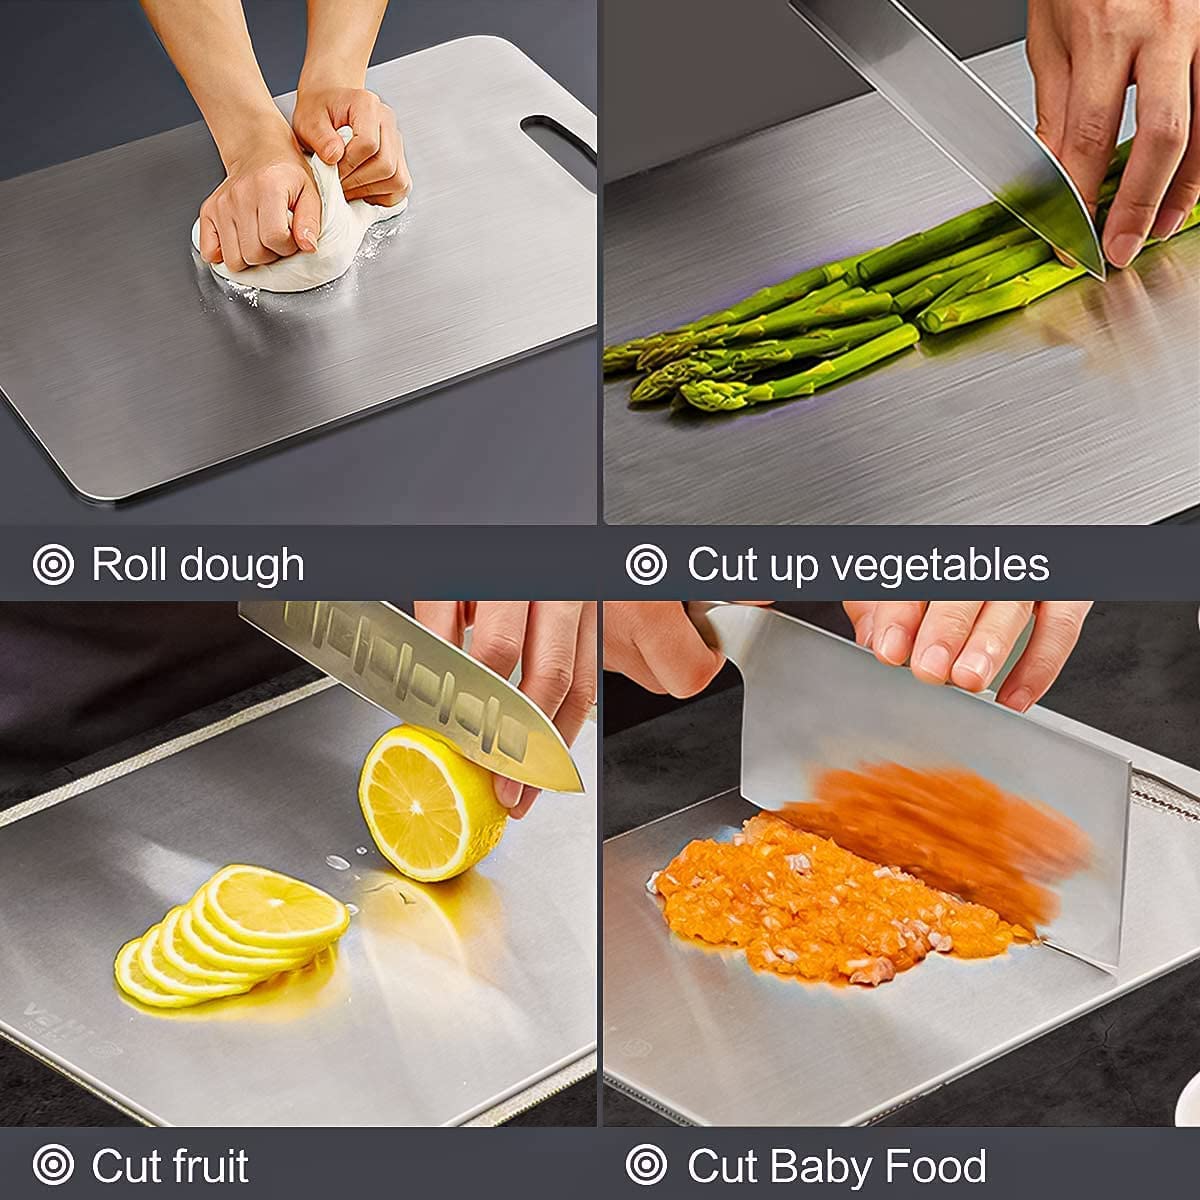 Eazyy Stainless Steel Kitchen Chopping Board | Countertop